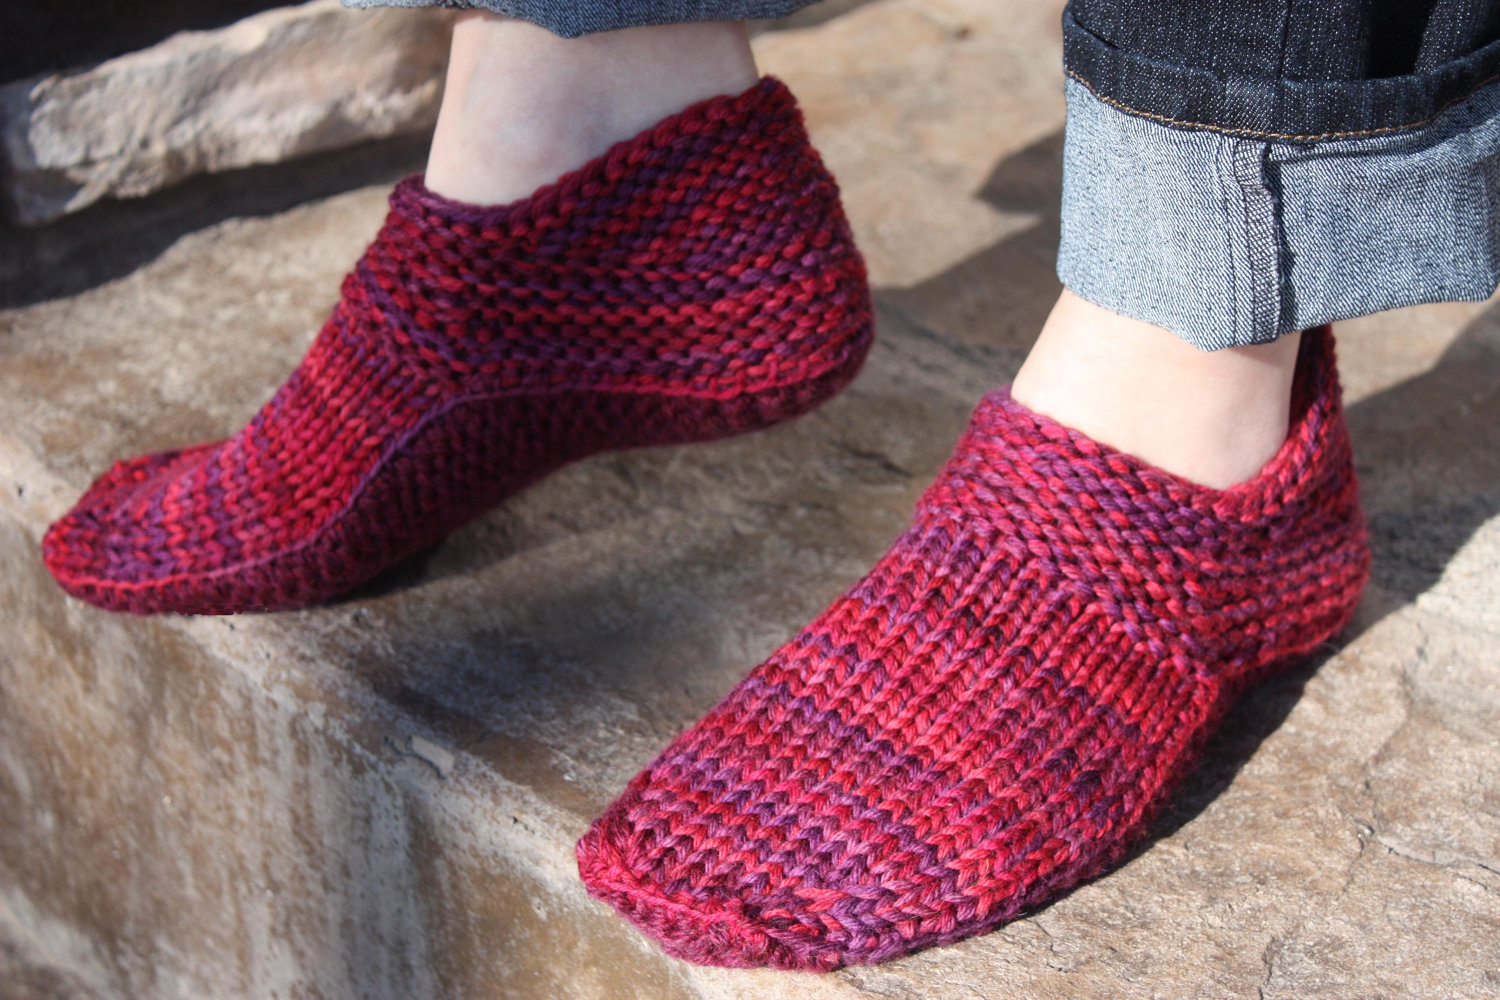 Knitted Slipper Patterns Knitted Slippers To Keep Your Feet Warm And Cozy Crochet And